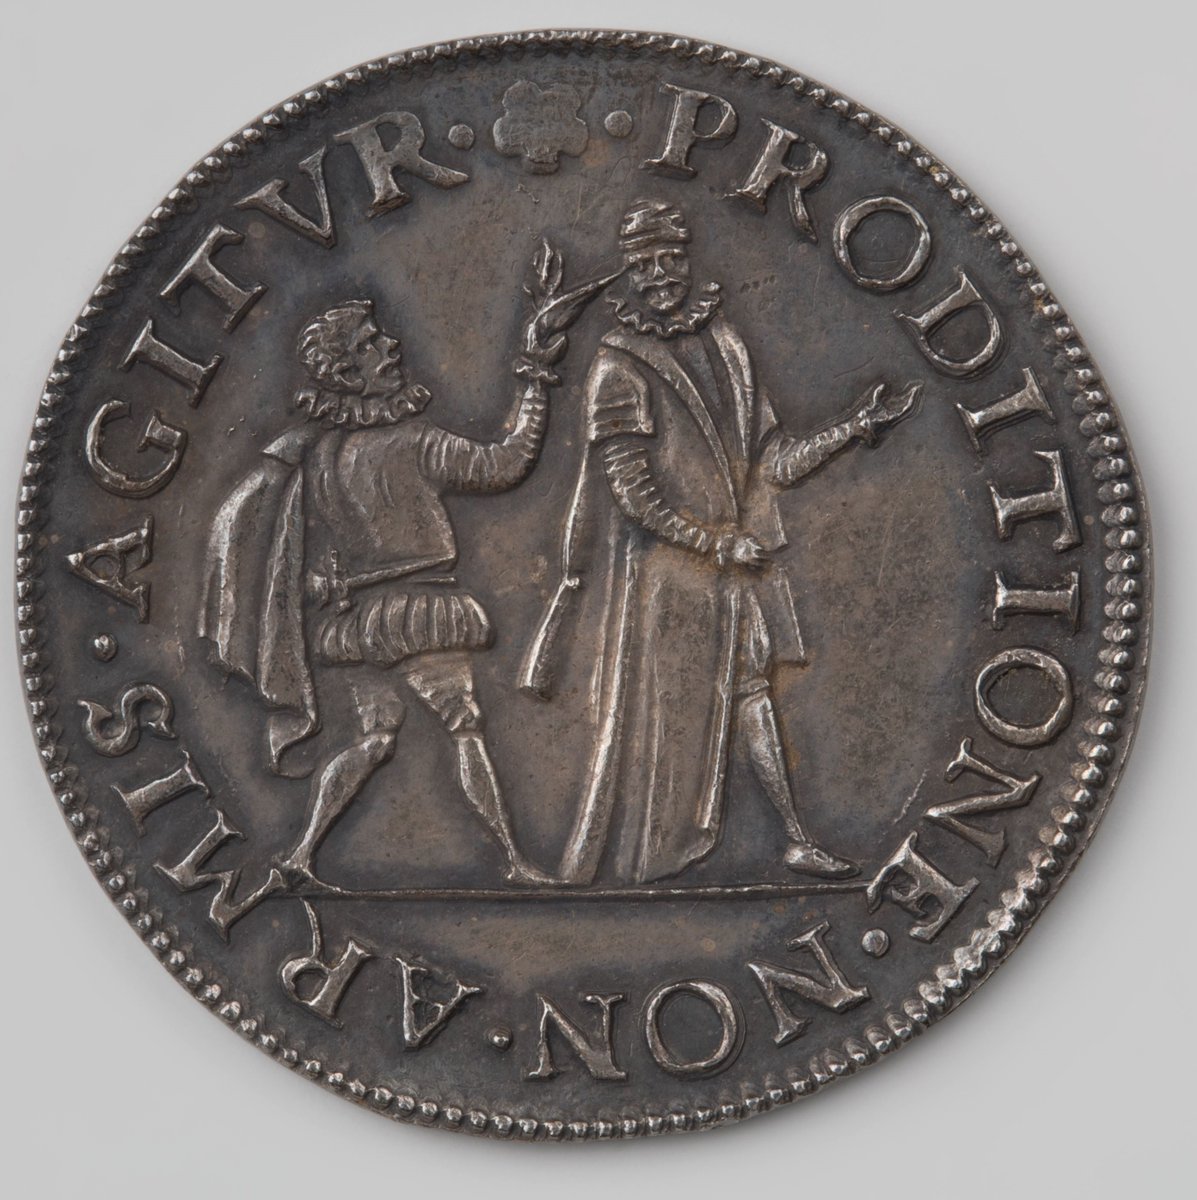 Juan de Jáuregui fired a pistol at the head of Prince William I of Orange on 18 March, 1582, in an unsuccessful assassination attempt.
The would-be assassin was then run through by swords & halberds of guards.

#KeepItOrange

1582 silver medal: @rijksmuseum